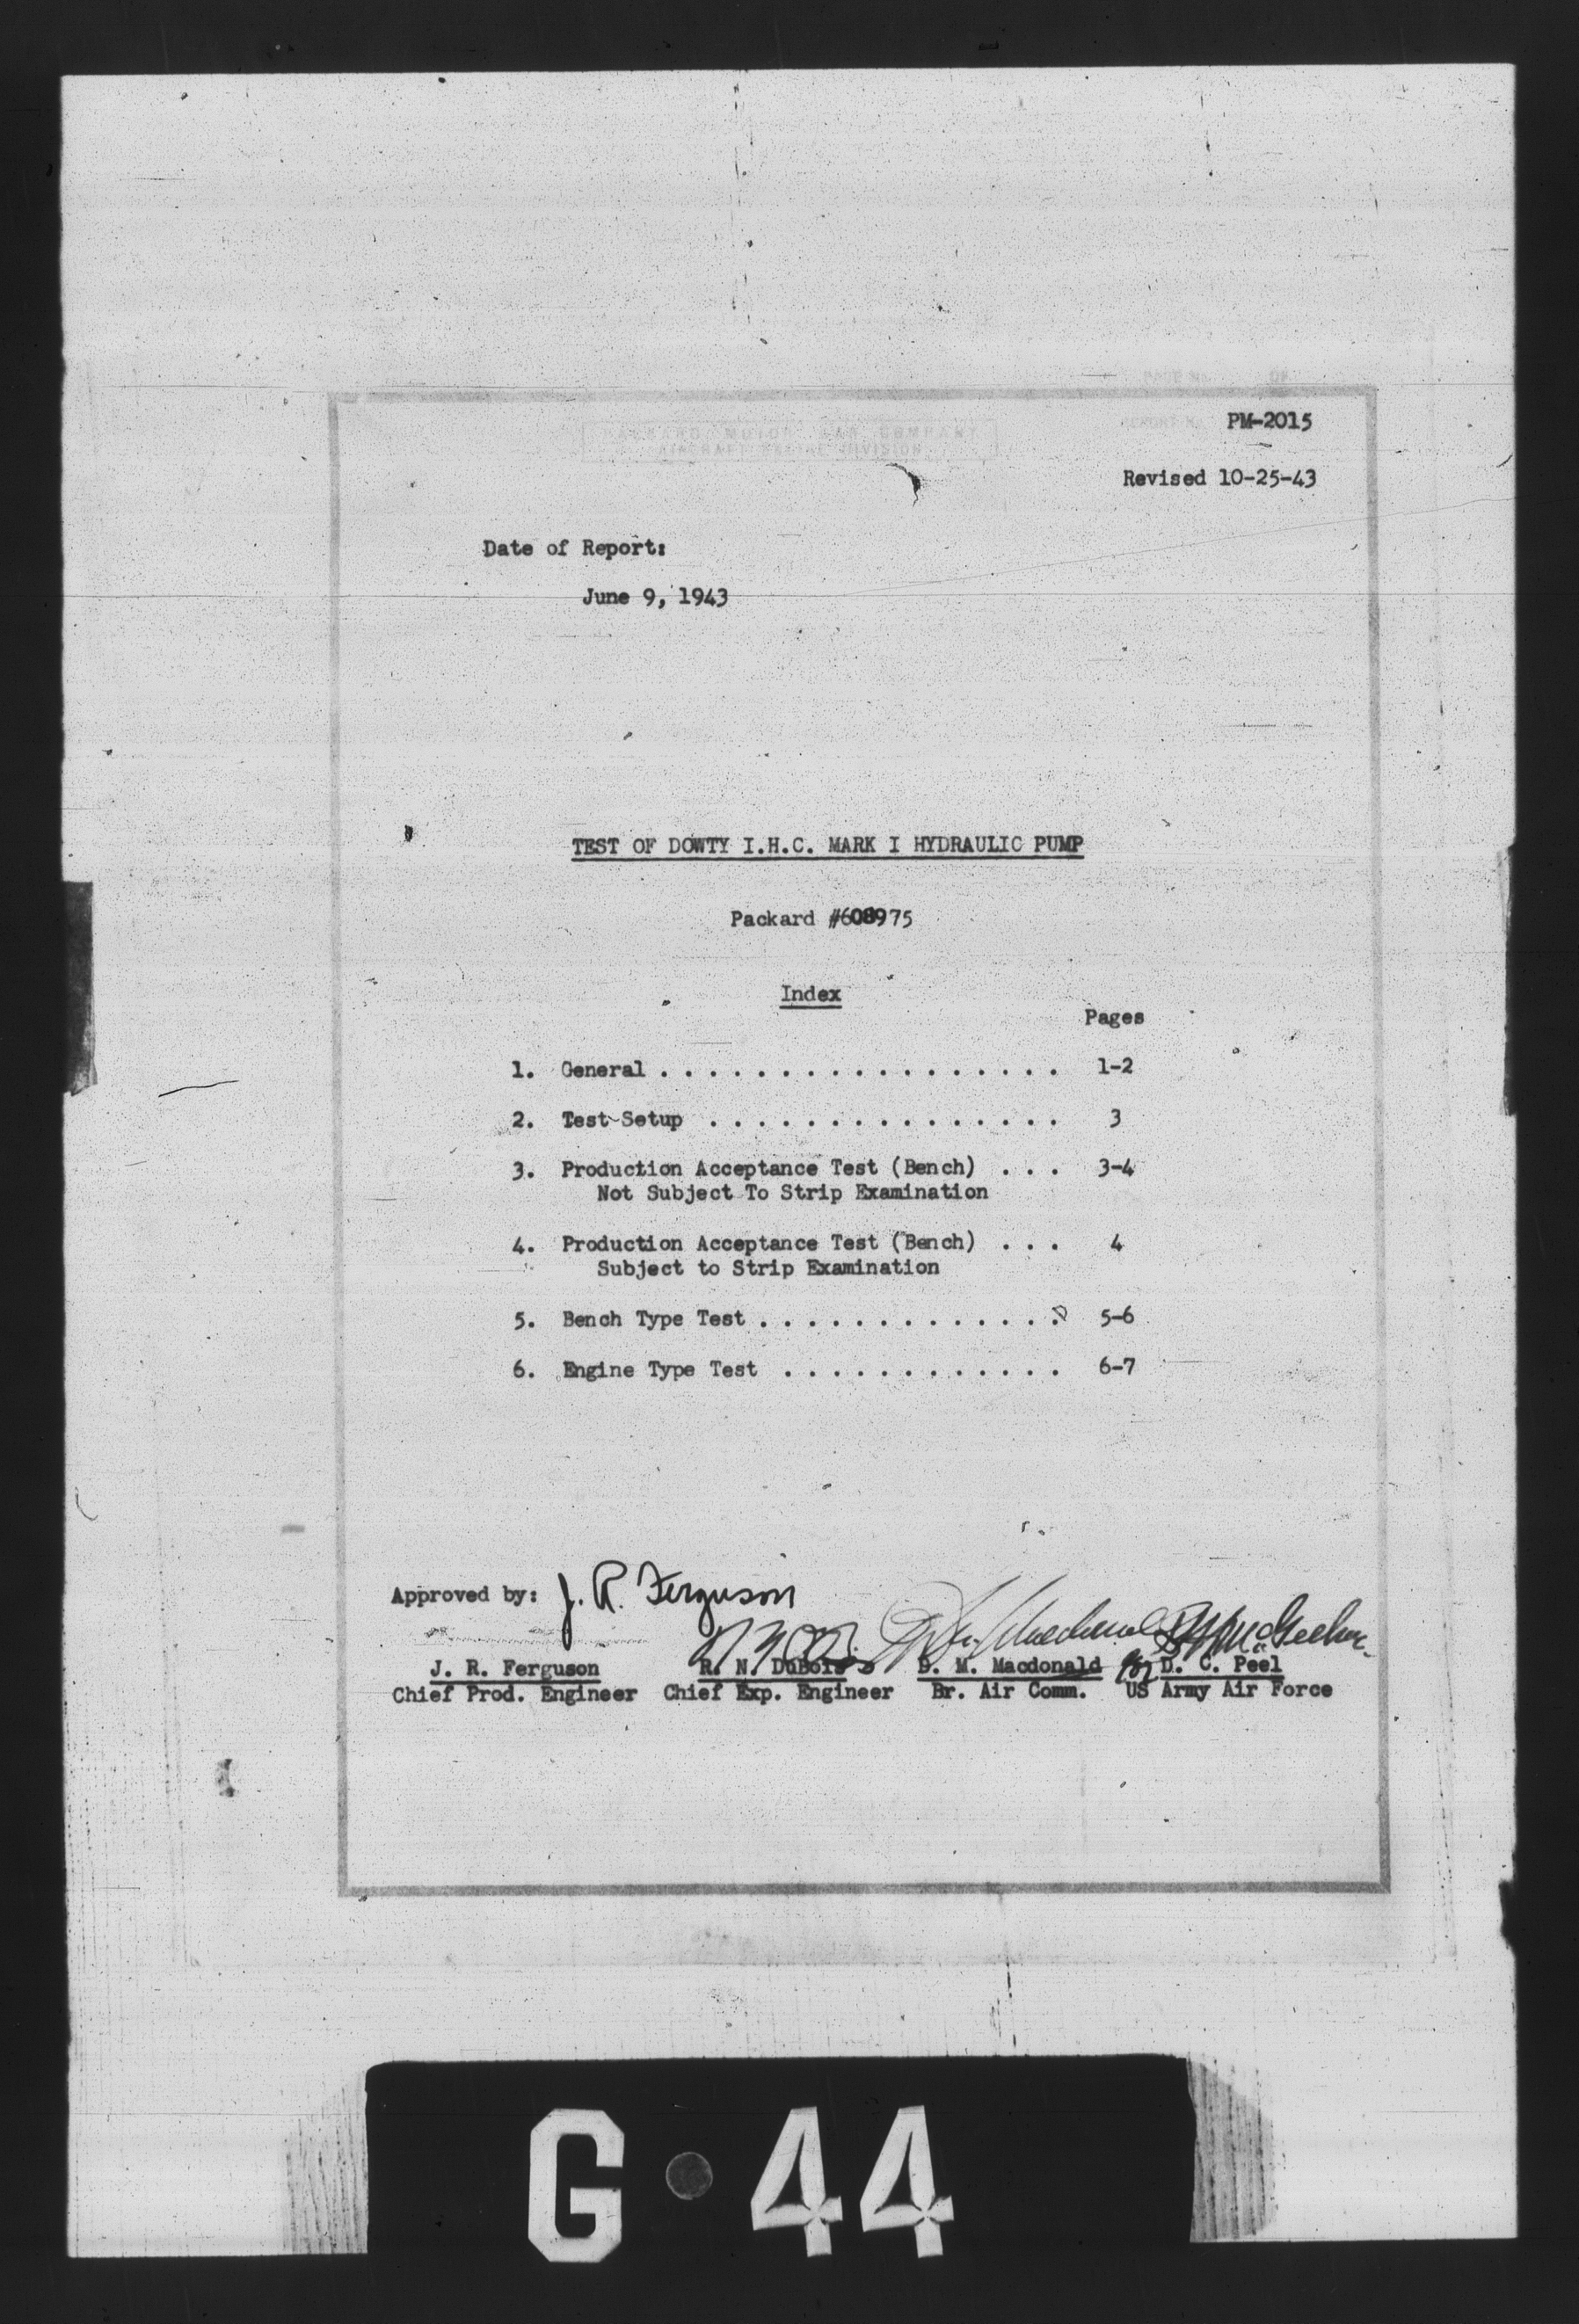 Sample page 1 from AirCorps Library document: Test of Dowty I.H.C. Mark I Hydraulic Pump